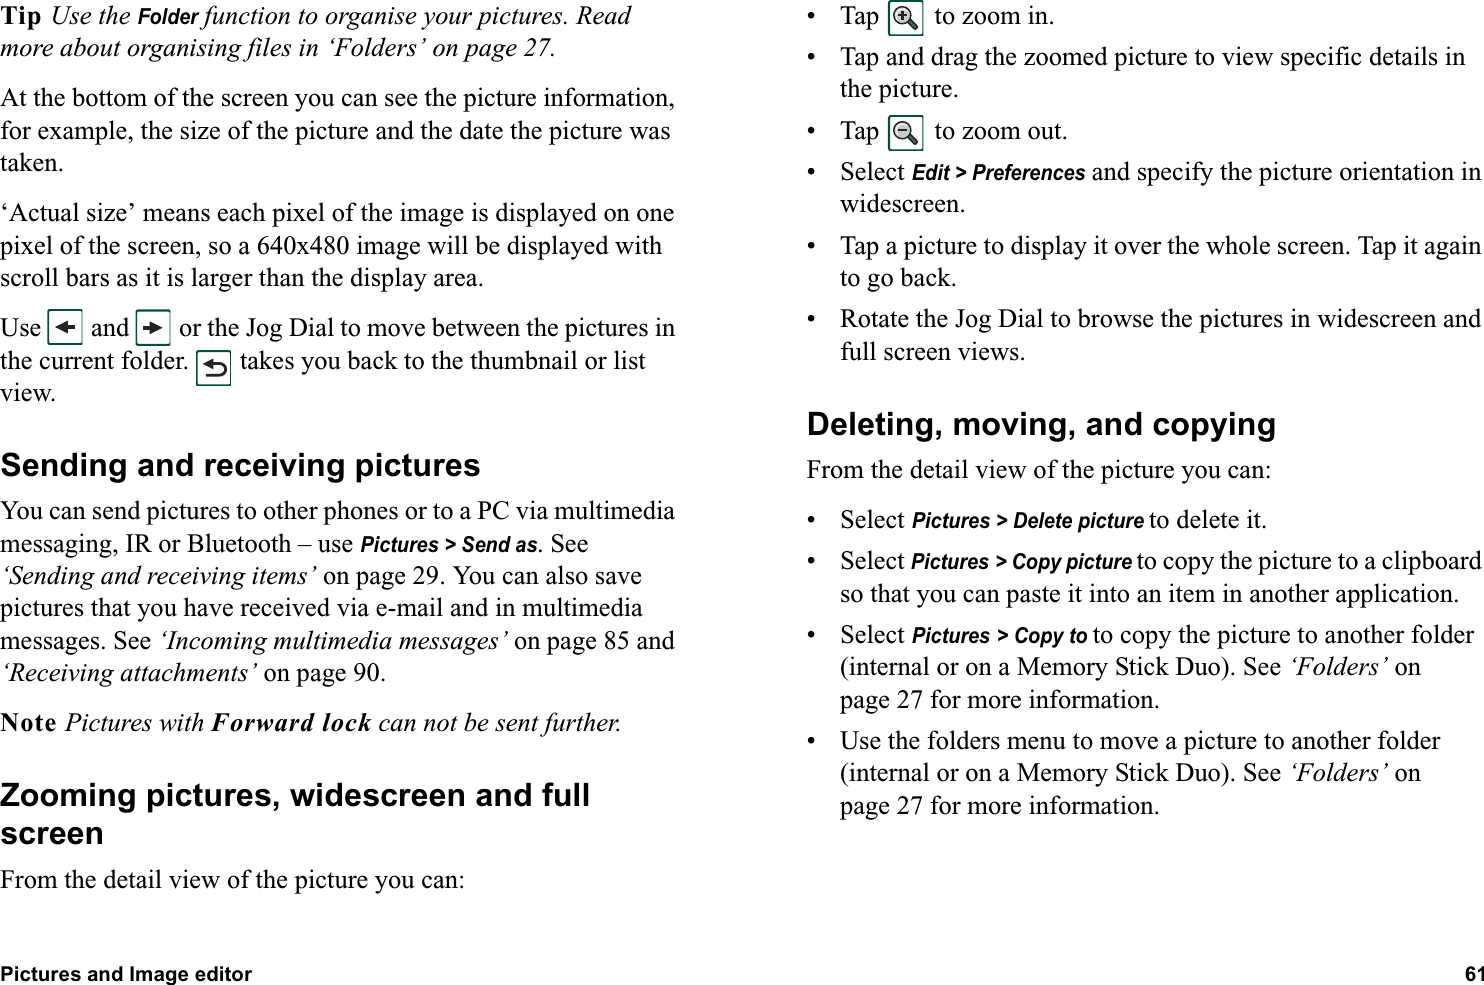 Pictures and Image editor 61  Tip Use the Folder function to organise your pictures. Read more about organising files in ‘Folders’ on page 27.At the bottom of the screen you can see the picture information, for example, the size of the picture and the date the picture was taken. ‘Actual size’ means each pixel of the image is displayed on one pixel of the screen, so a 640x480 image will be displayed with scroll bars as it is larger than the display area.Use   and   or the Jog Dial to move between the pictures in the current folder.   takes you back to the thumbnail or list view.Sending and receiving picturesYou can send pictures to other phones or to a PC via multimedia messaging, IR or Bluetooth – use Pictures &gt; Send as. See ‘Sending and receiving items’ on page 29. You can also save pictures that you have received via e-mail and in multimedia messages. See ‘Incoming multimedia messages’ on page 85 and ‘Receiving attachments’ on page 90.Note Pictures with Forward lock can not be sent further.Zooming pictures, widescreen and full screenFrom the detail view of the picture you can:• Tap   to zoom in.• Tap and drag the zoomed picture to view specific details in the picture.• Tap   to zoom out.• Select Edit &gt; Preferences and specify the picture orientation in widescreen.• Tap a picture to display it over the whole screen. Tap it again to go back.• Rotate the Jog Dial to browse the pictures in widescreen and full screen views.Deleting, moving, and copyingFrom the detail view of the picture you can:• Select Pictures &gt; Delete picture to delete it.• Select Pictures &gt; Copy picture to copy the picture to a clipboard so that you can paste it into an item in another application.• Select Pictures &gt; Copy to to copy the picture to another folder (internal or on a Memory Stick Duo). See ‘Folders’ on page 27 for more information.• Use the folders menu to move a picture to another folder (internal or on a Memory Stick Duo). See ‘Folders’ on page 27 for more information.